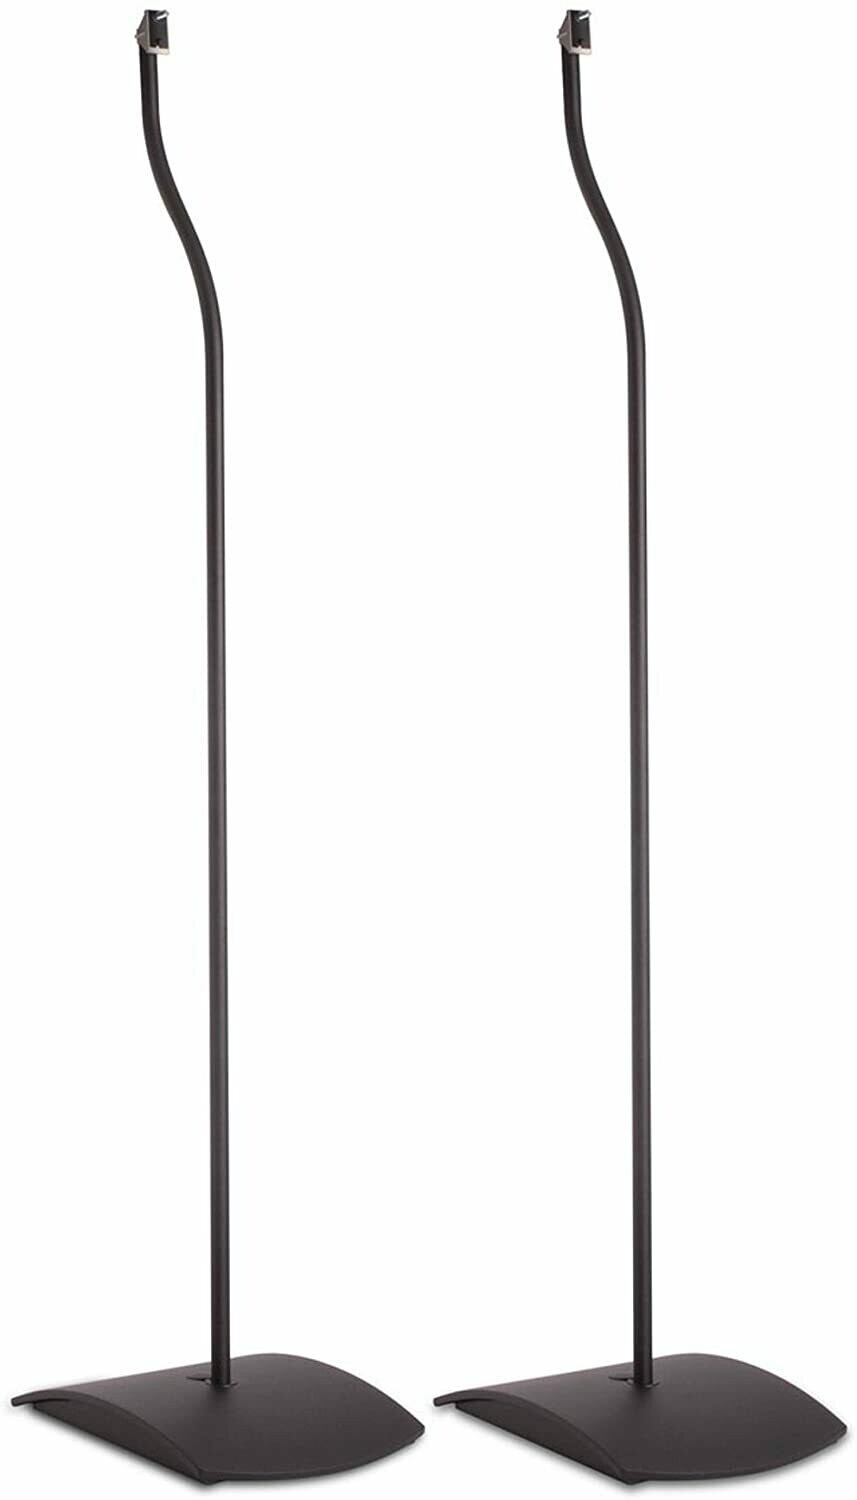 Bose  universal floor stand for Lifestyle 650, Surround Speakers 700 -  Pair